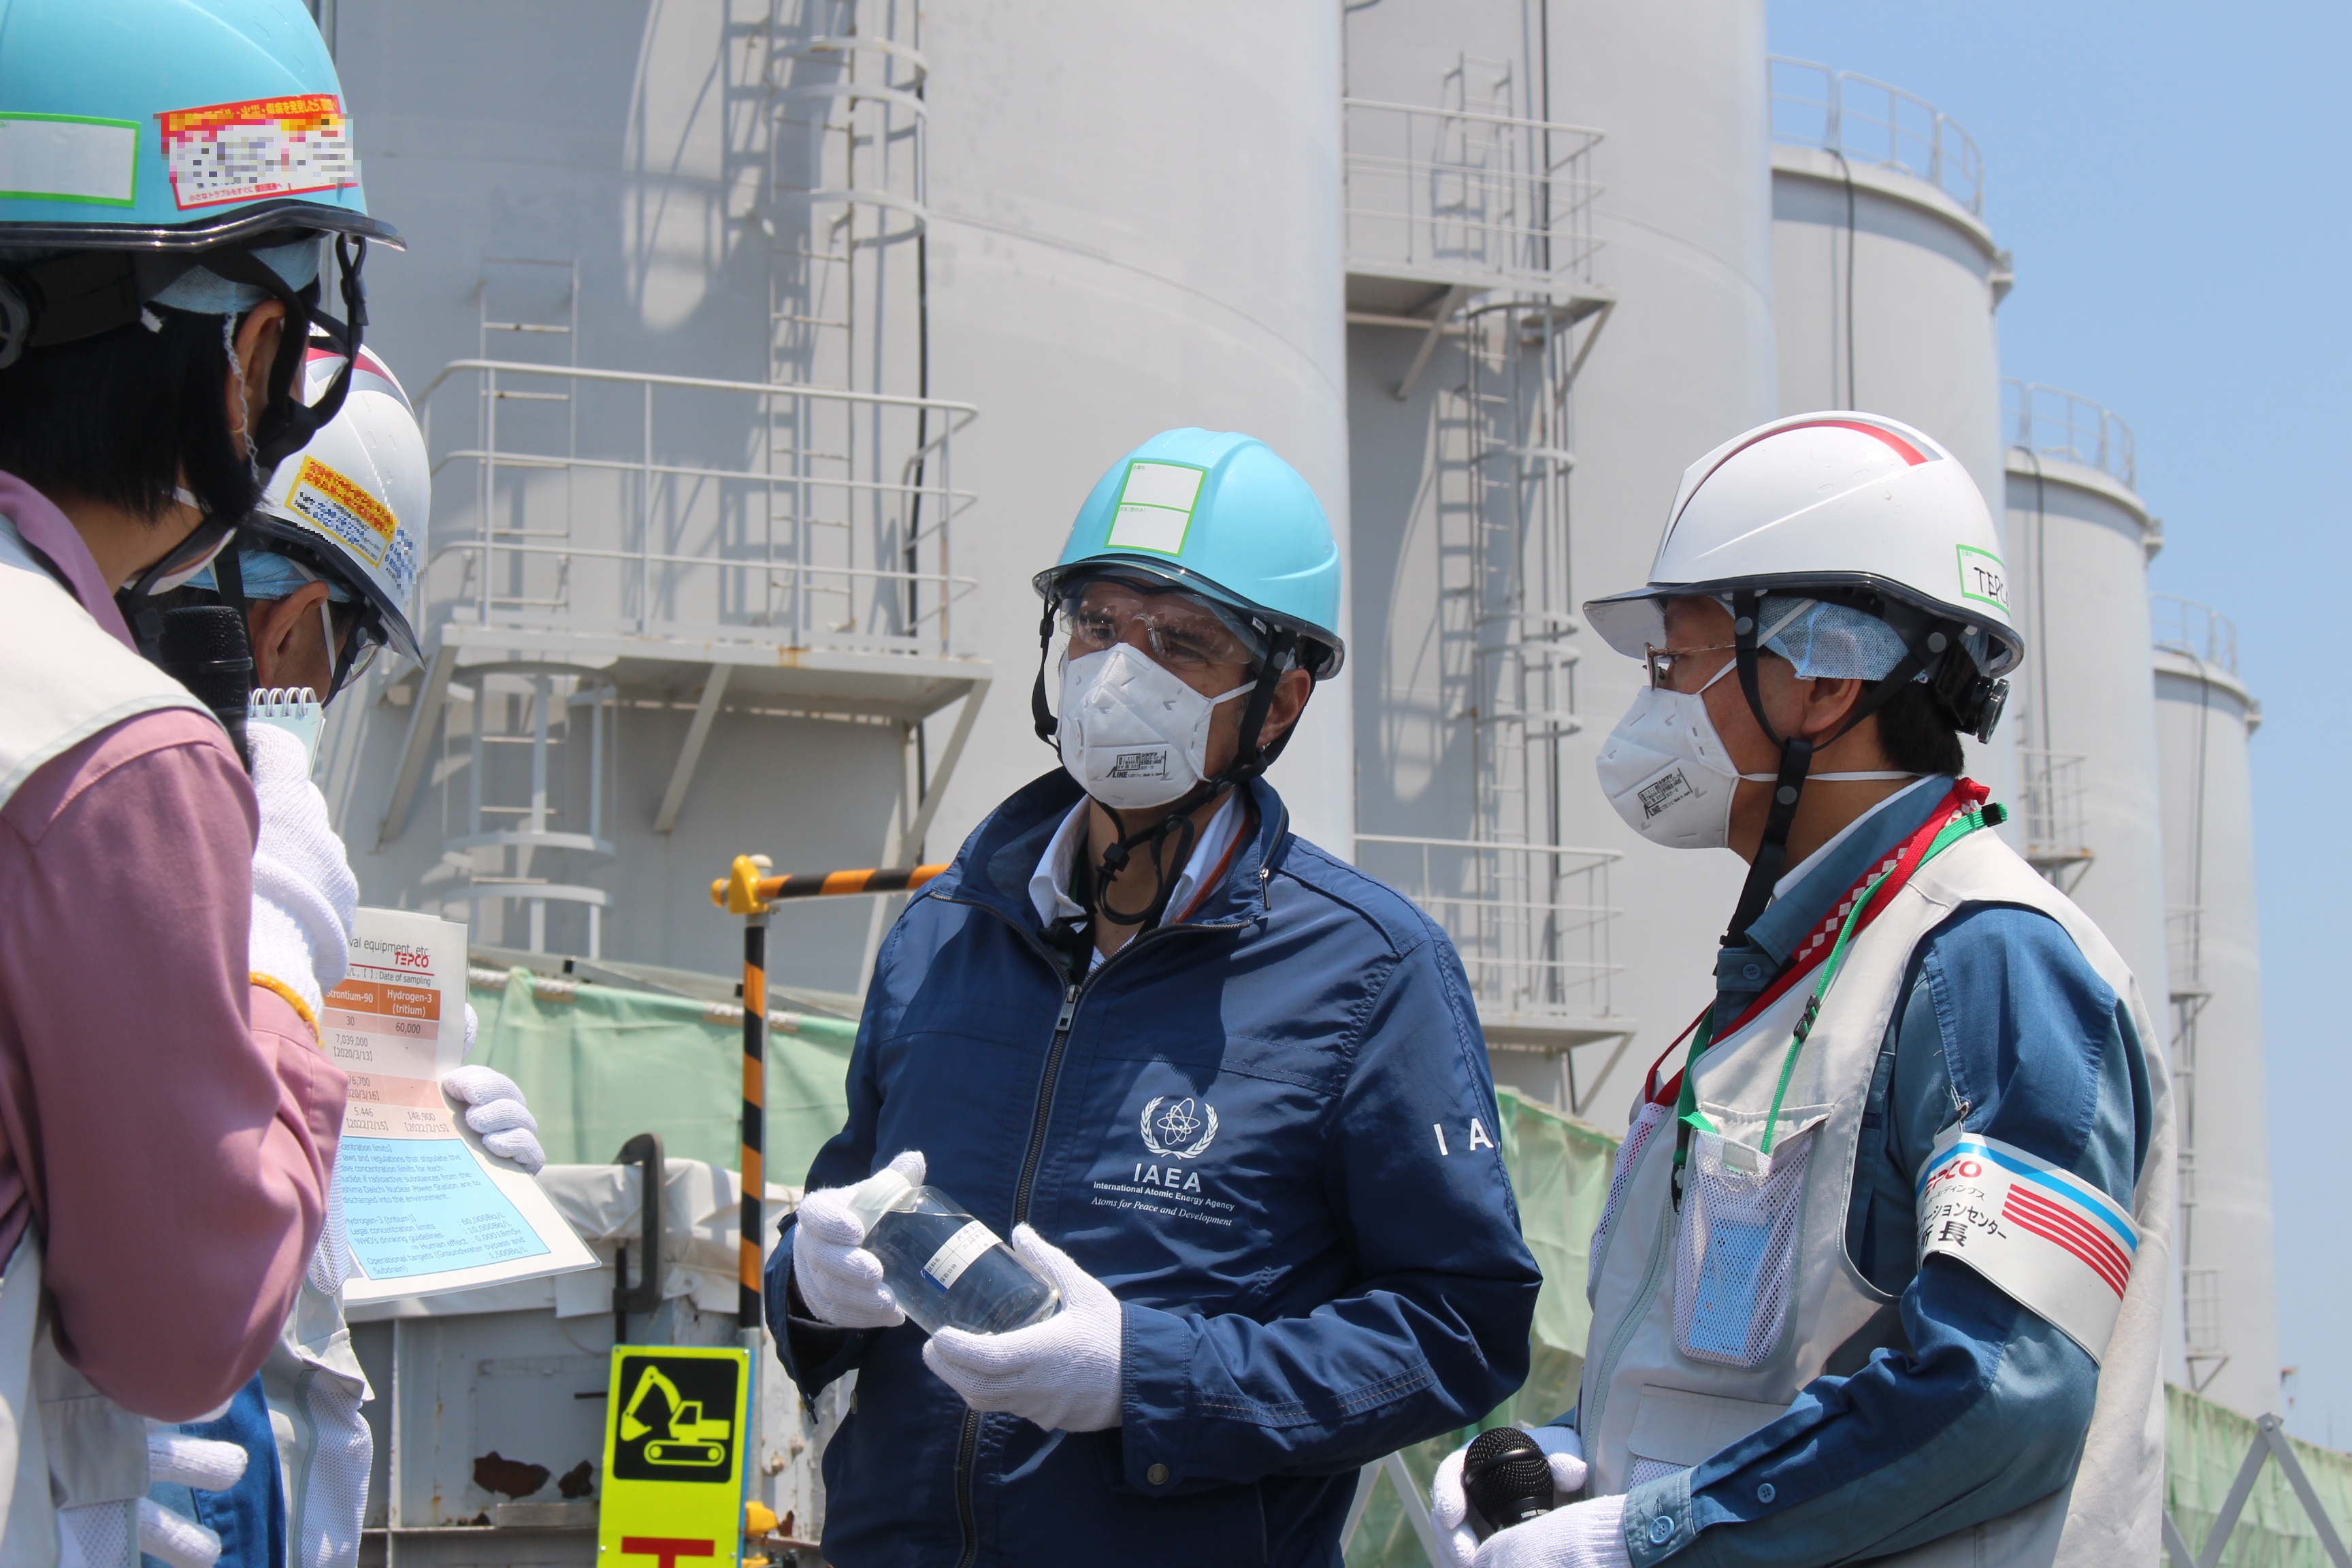 IAEA Director General Grossi’s visit to the Fukushima Daiichi Nuclear Power Station